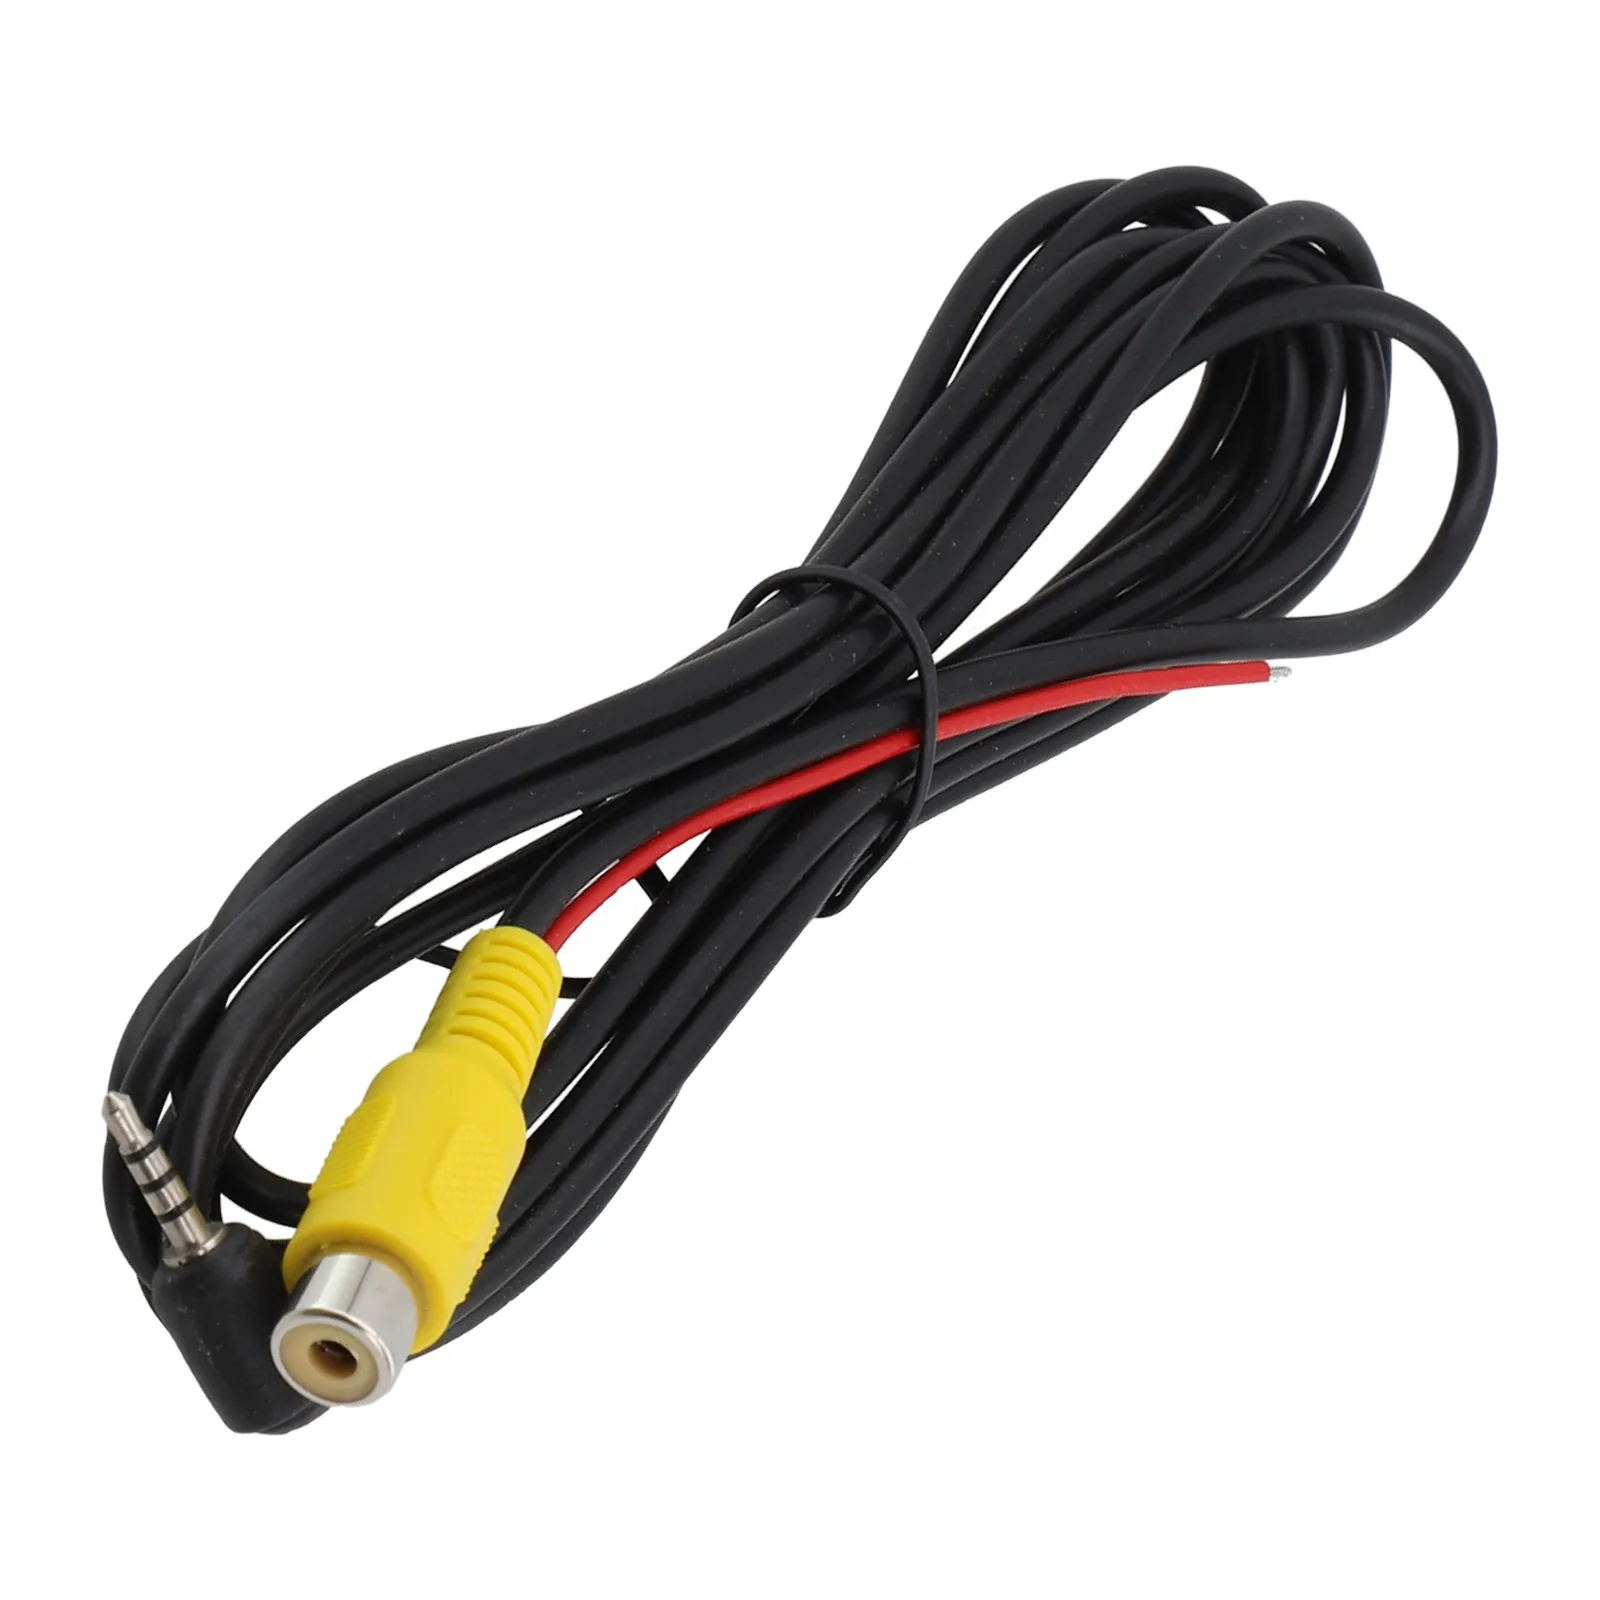 

Car Accessories Conversion Lin Black Car Navigation Machine Converter Cable For All Cars And Motorcycles For All Cars New